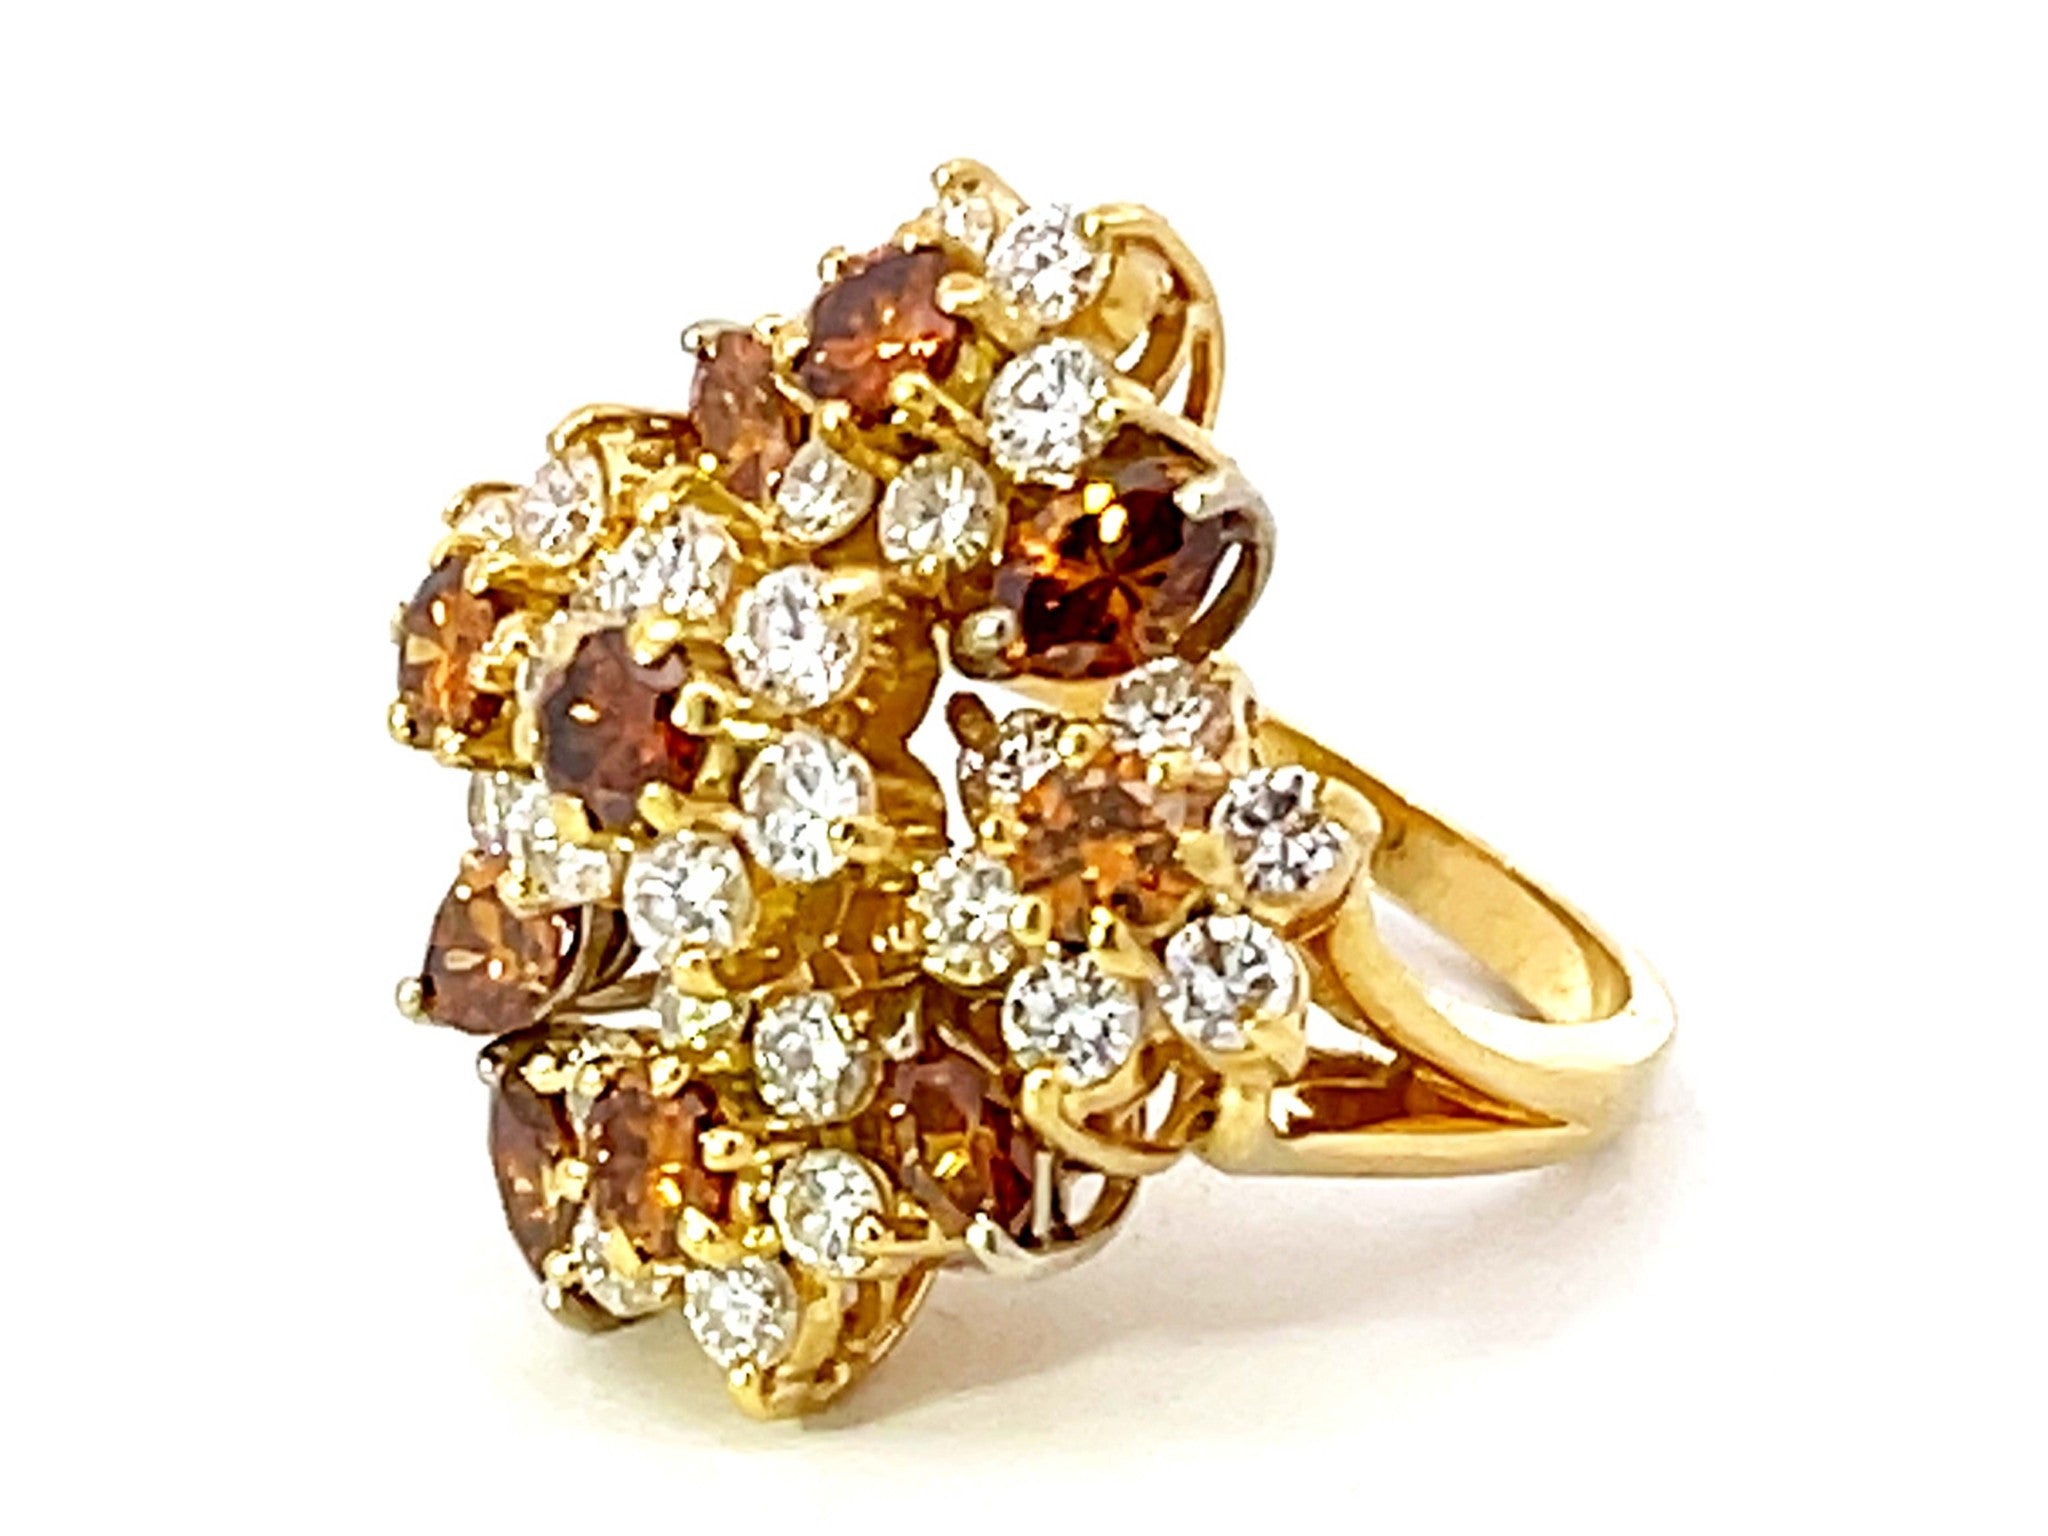 Terrel and Zimmelman Natural Fancy Vivid Diamond Cluster Ring in 18K Yellow Gold